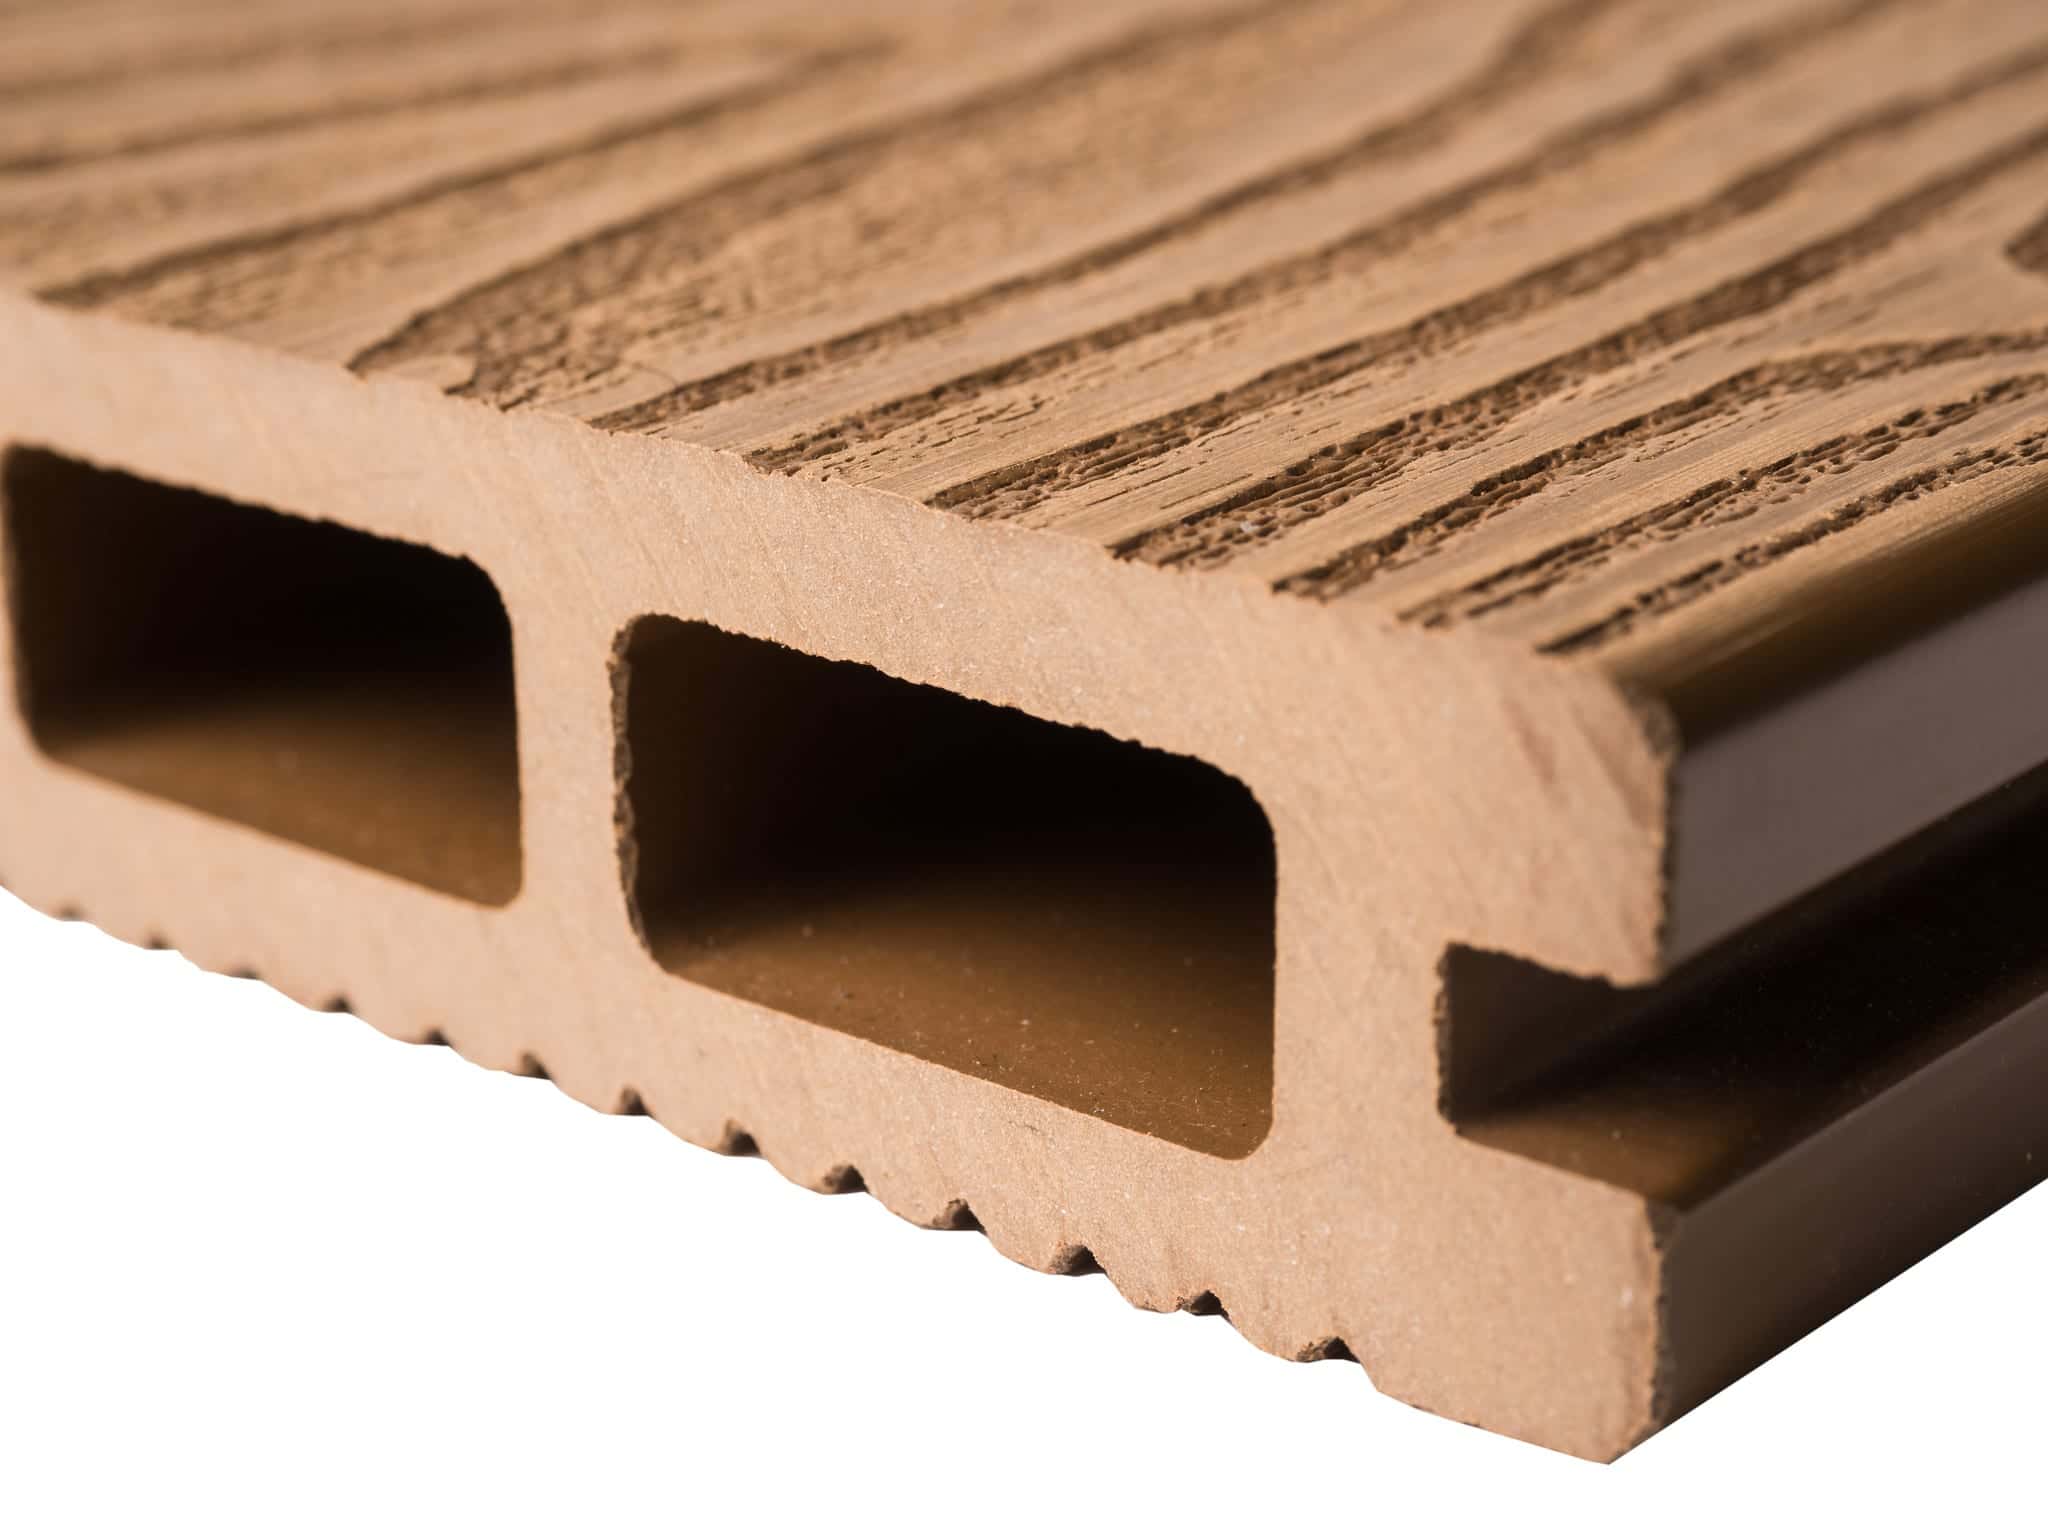 Does composite decking need treating like timber decking?